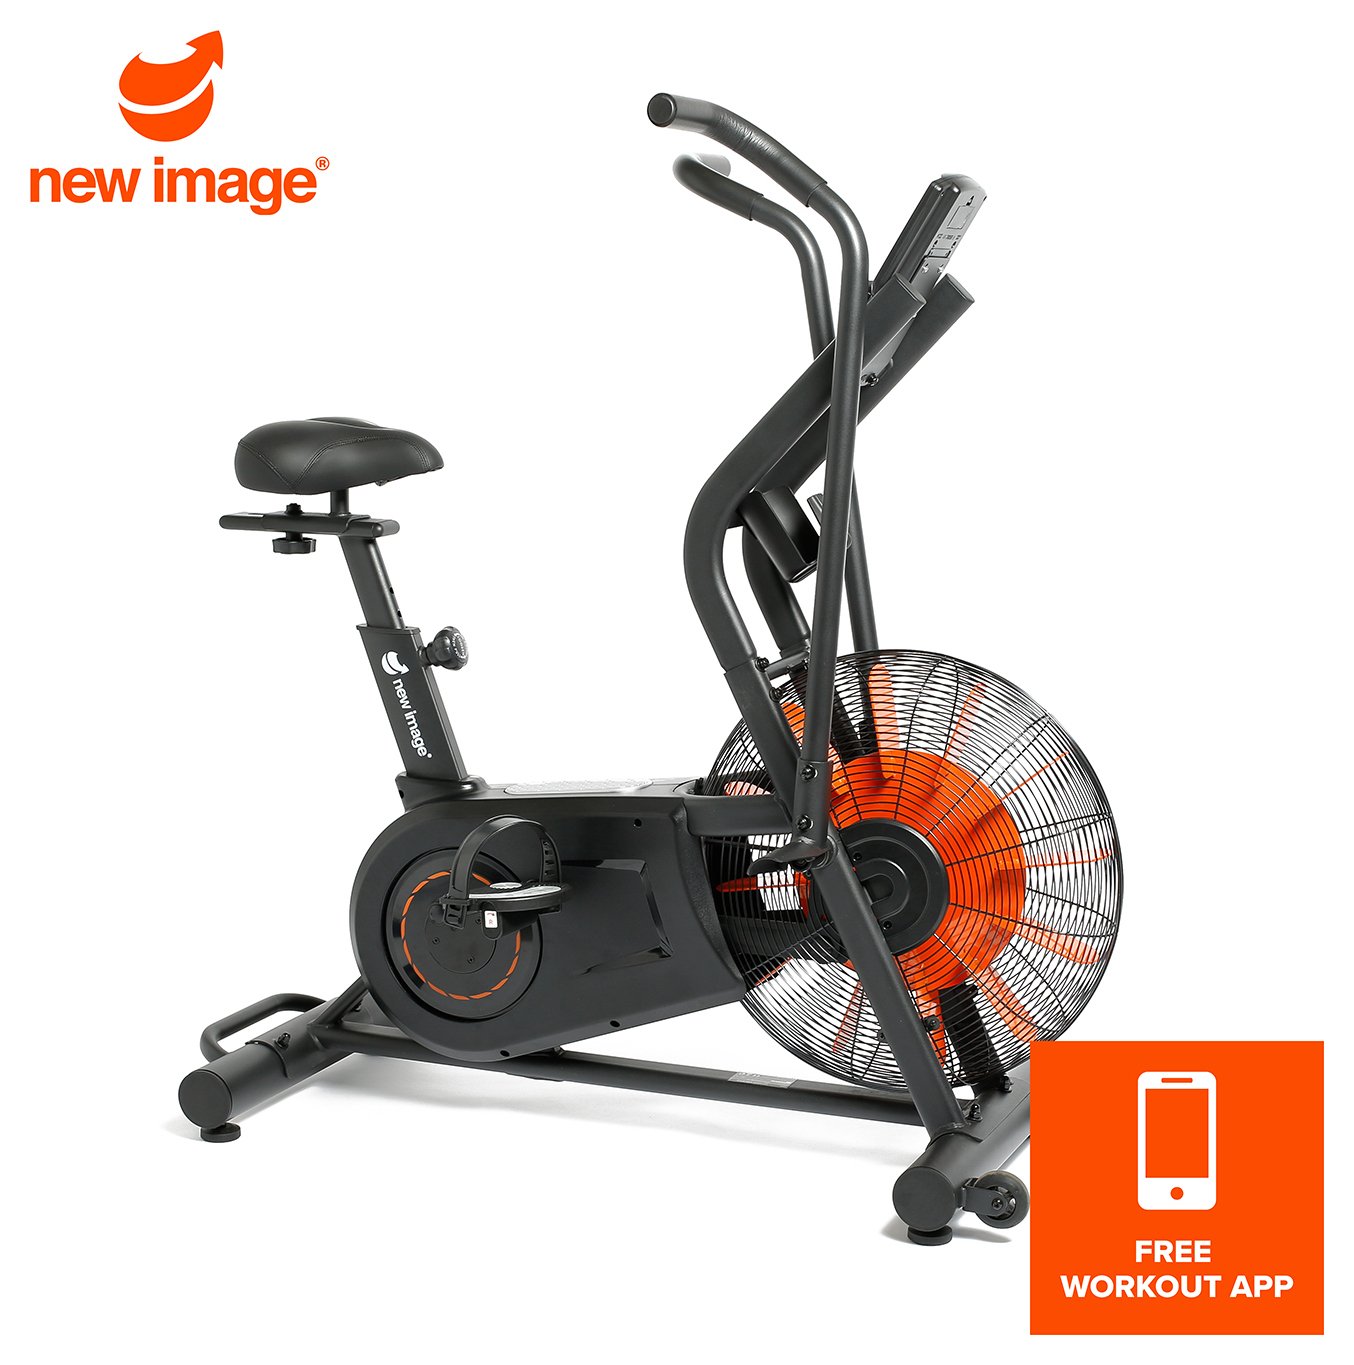 Cyclone X3 Air Assault Exercise Bike by New Image